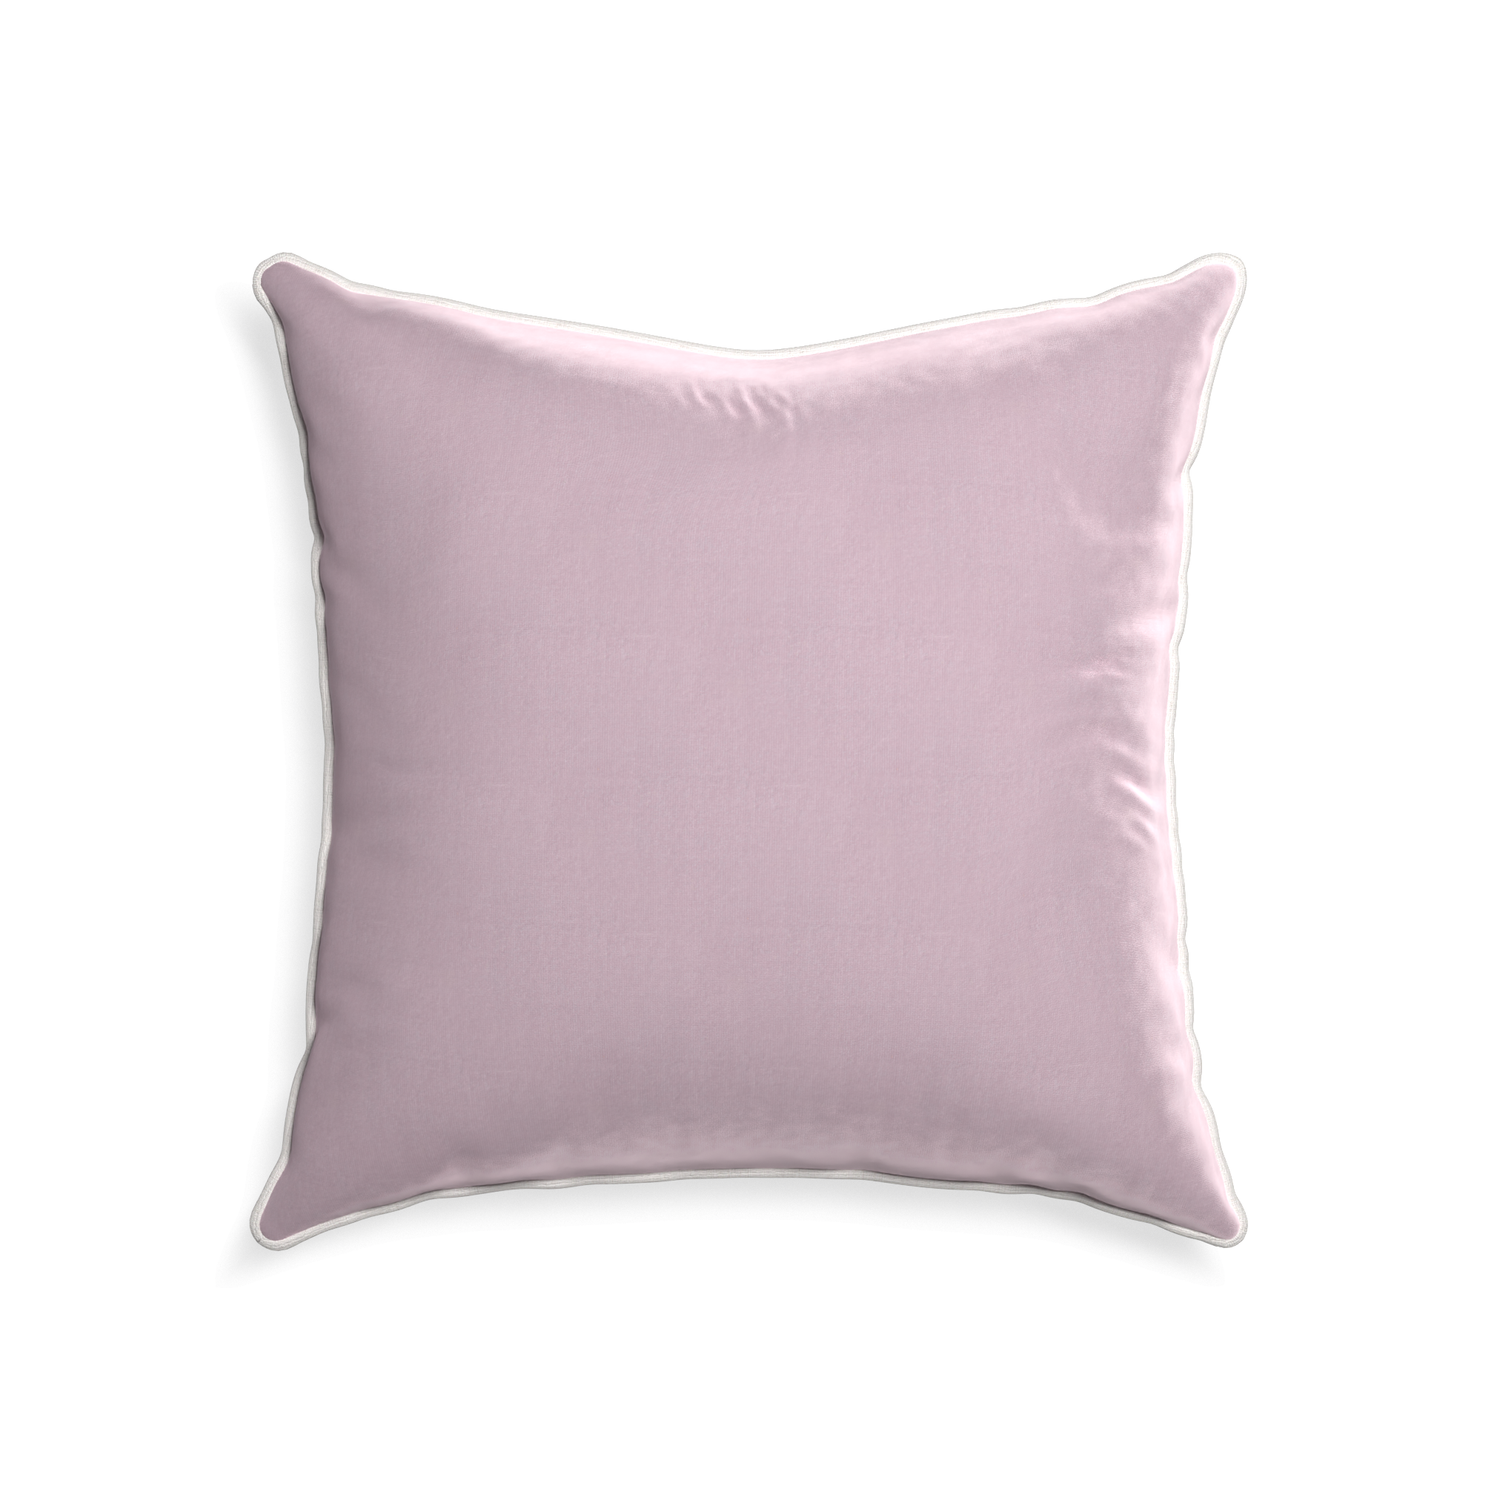 22-square lilac velvet custom lilacpillow with snow piping on white background